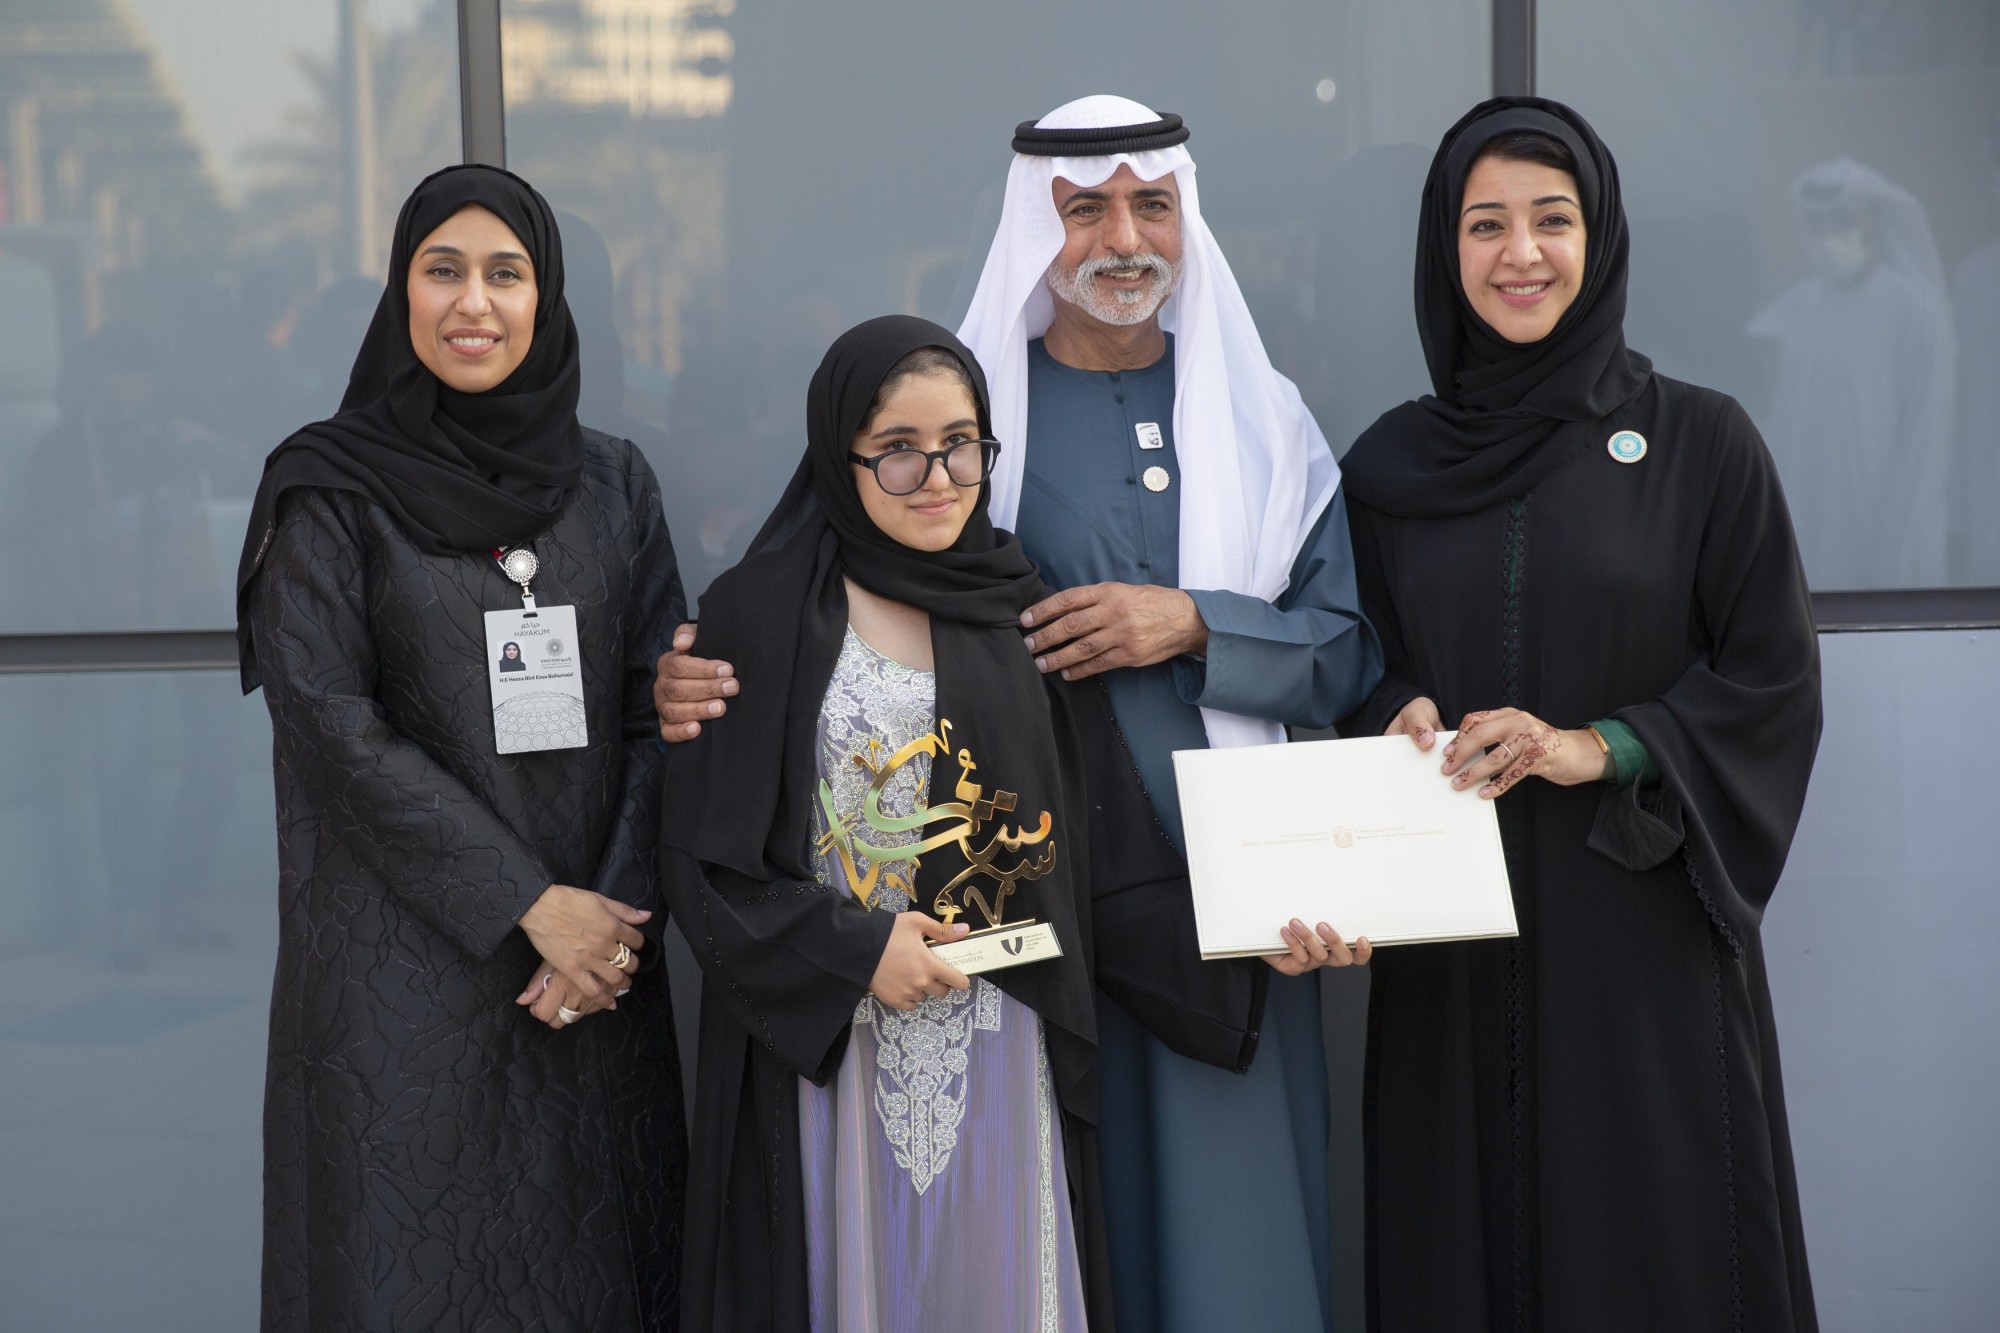 His Excellency Sheikh Nahayan Mabarak Al Nahayan (R2) UAE Minister of Tolerance and Coexistence Commissioner General of Expo 2020 Dubai Her Excellency Reem Al Hashimy (R1) UAE Minister of State for International Cooperation and Director